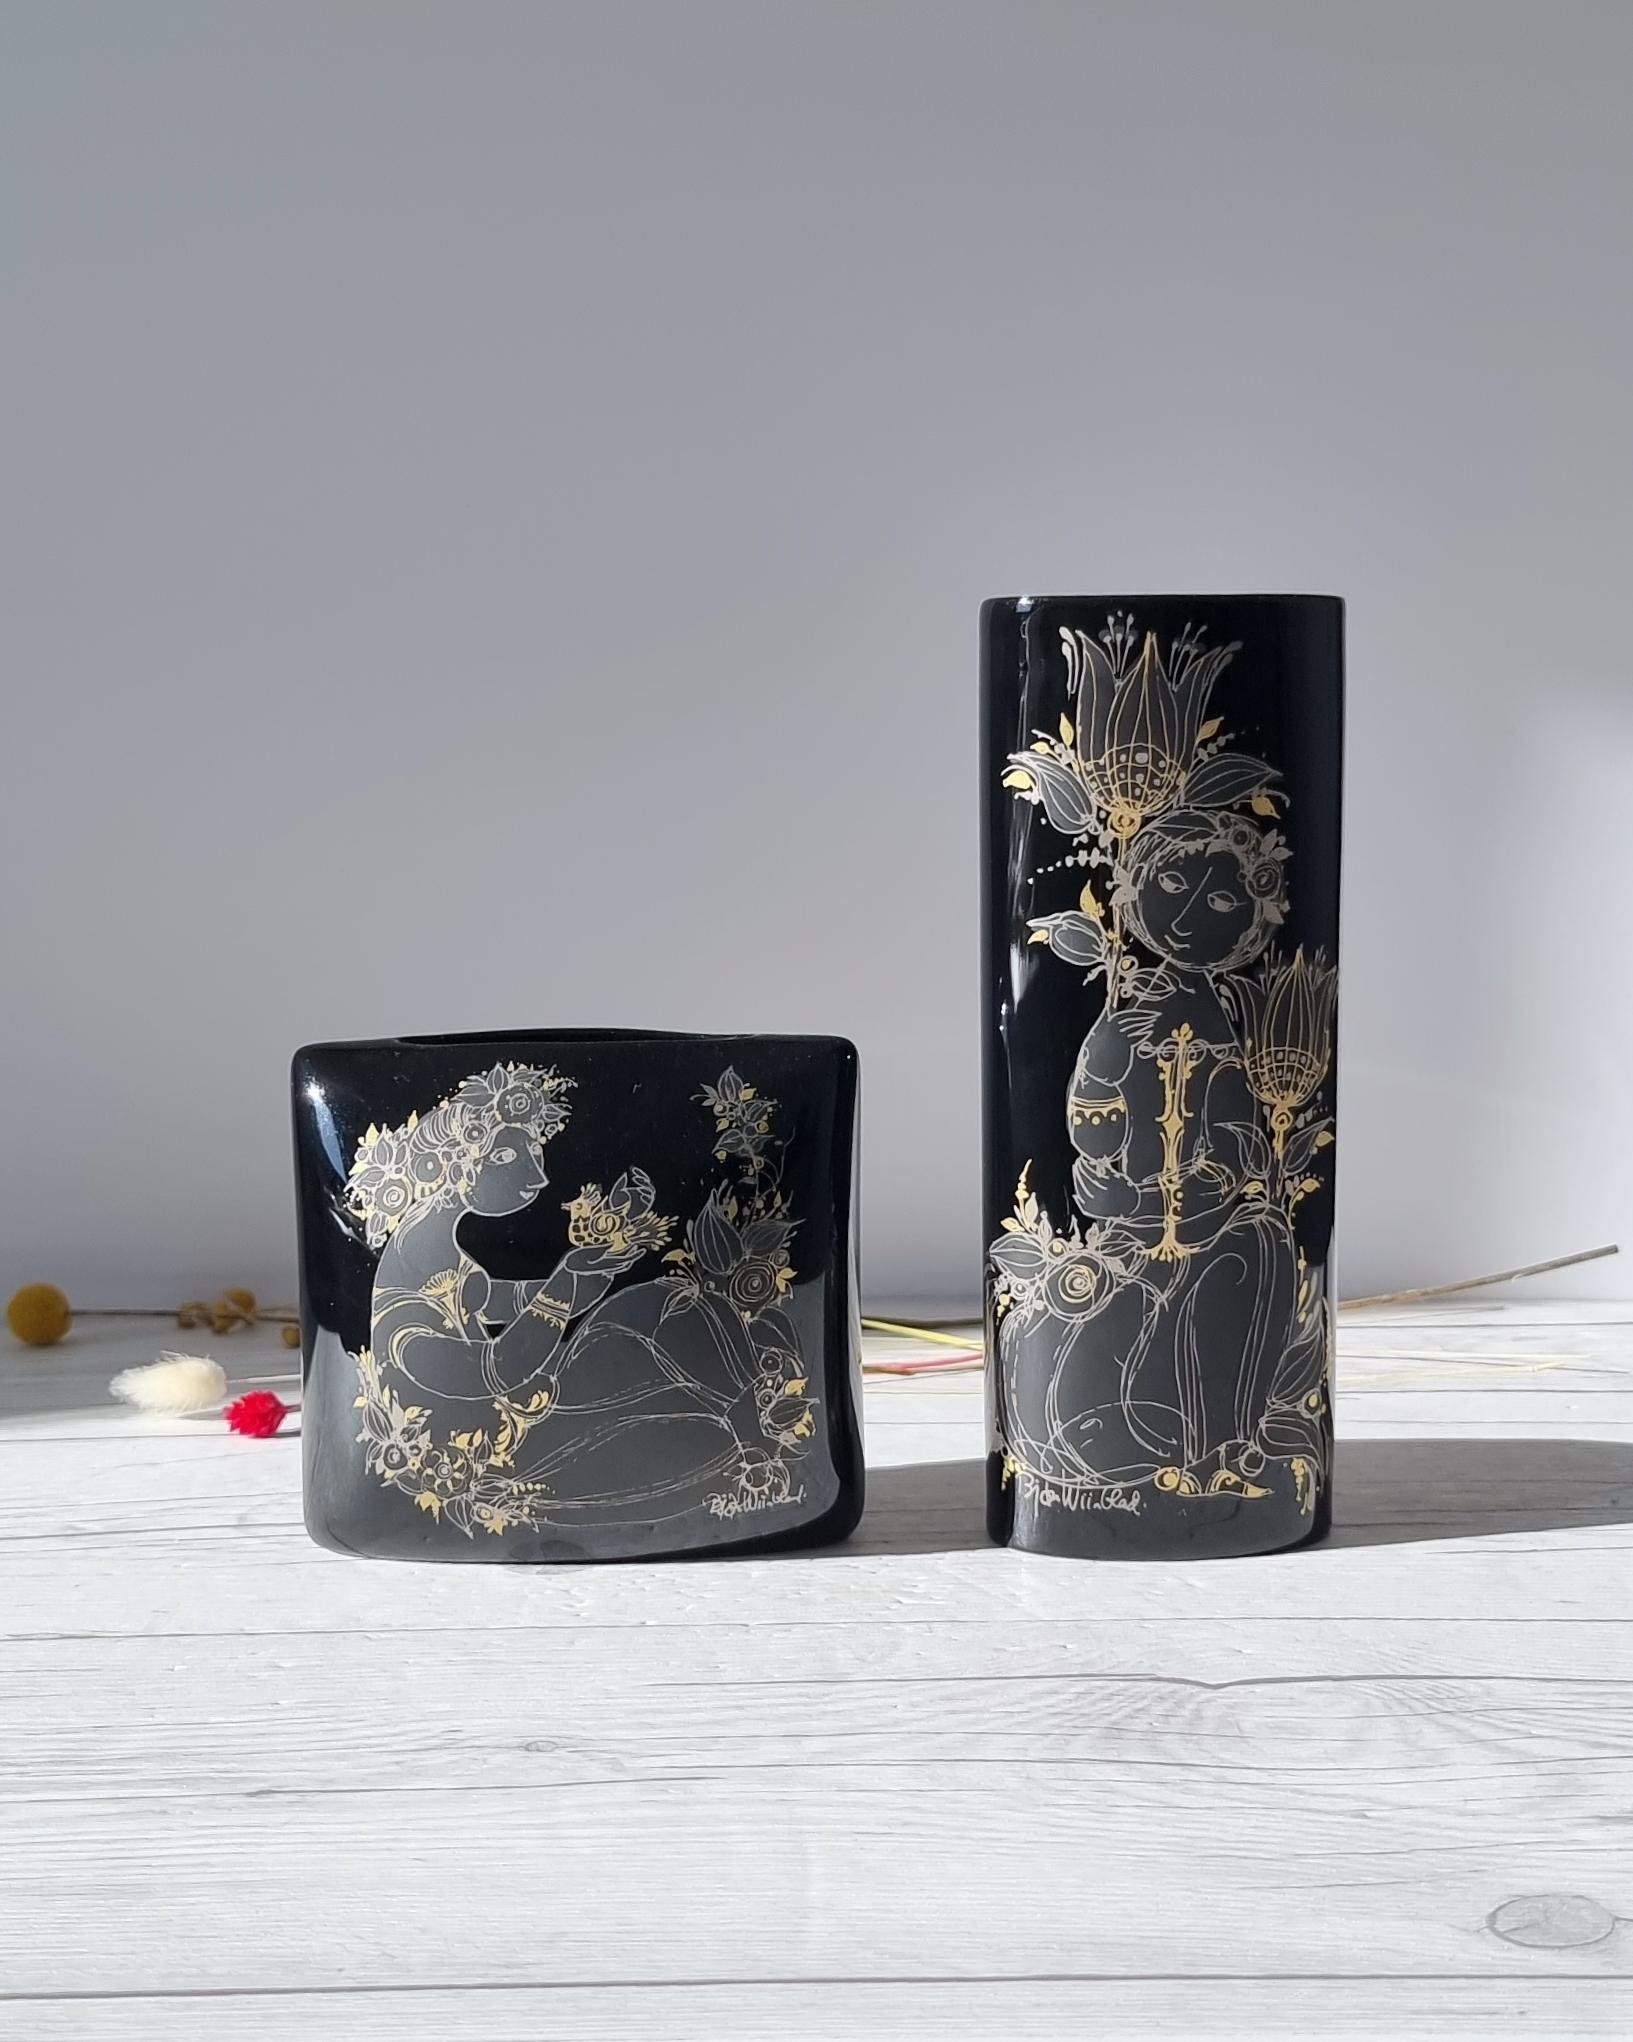 This exquisitely illustrated pair of porcelain noire art is by celebrated Danish illustrator and glass, silver, textiles, ceramics designer Bjorn Wiinblad (b. 1918 - d. 2006) who designed them for Rosenthal in the 1960s.

Both pieces are from The